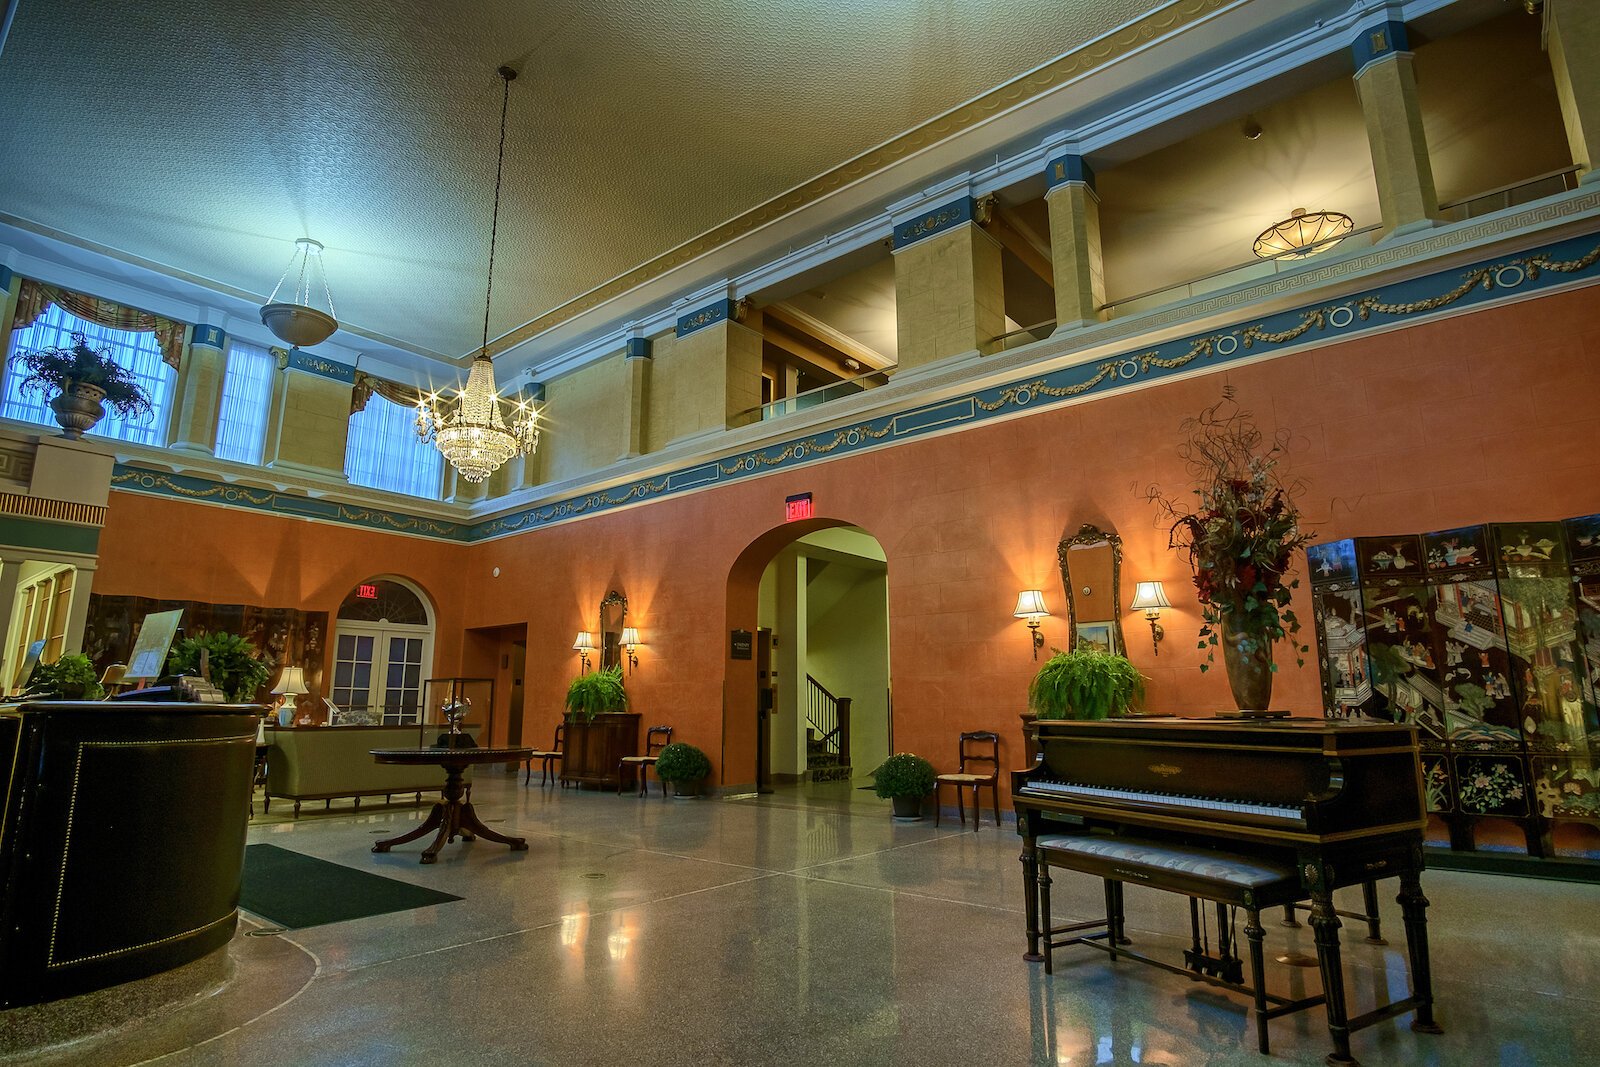 The main lobby of the Charley Creek Inn at 111 W. Market St. in Wabash.